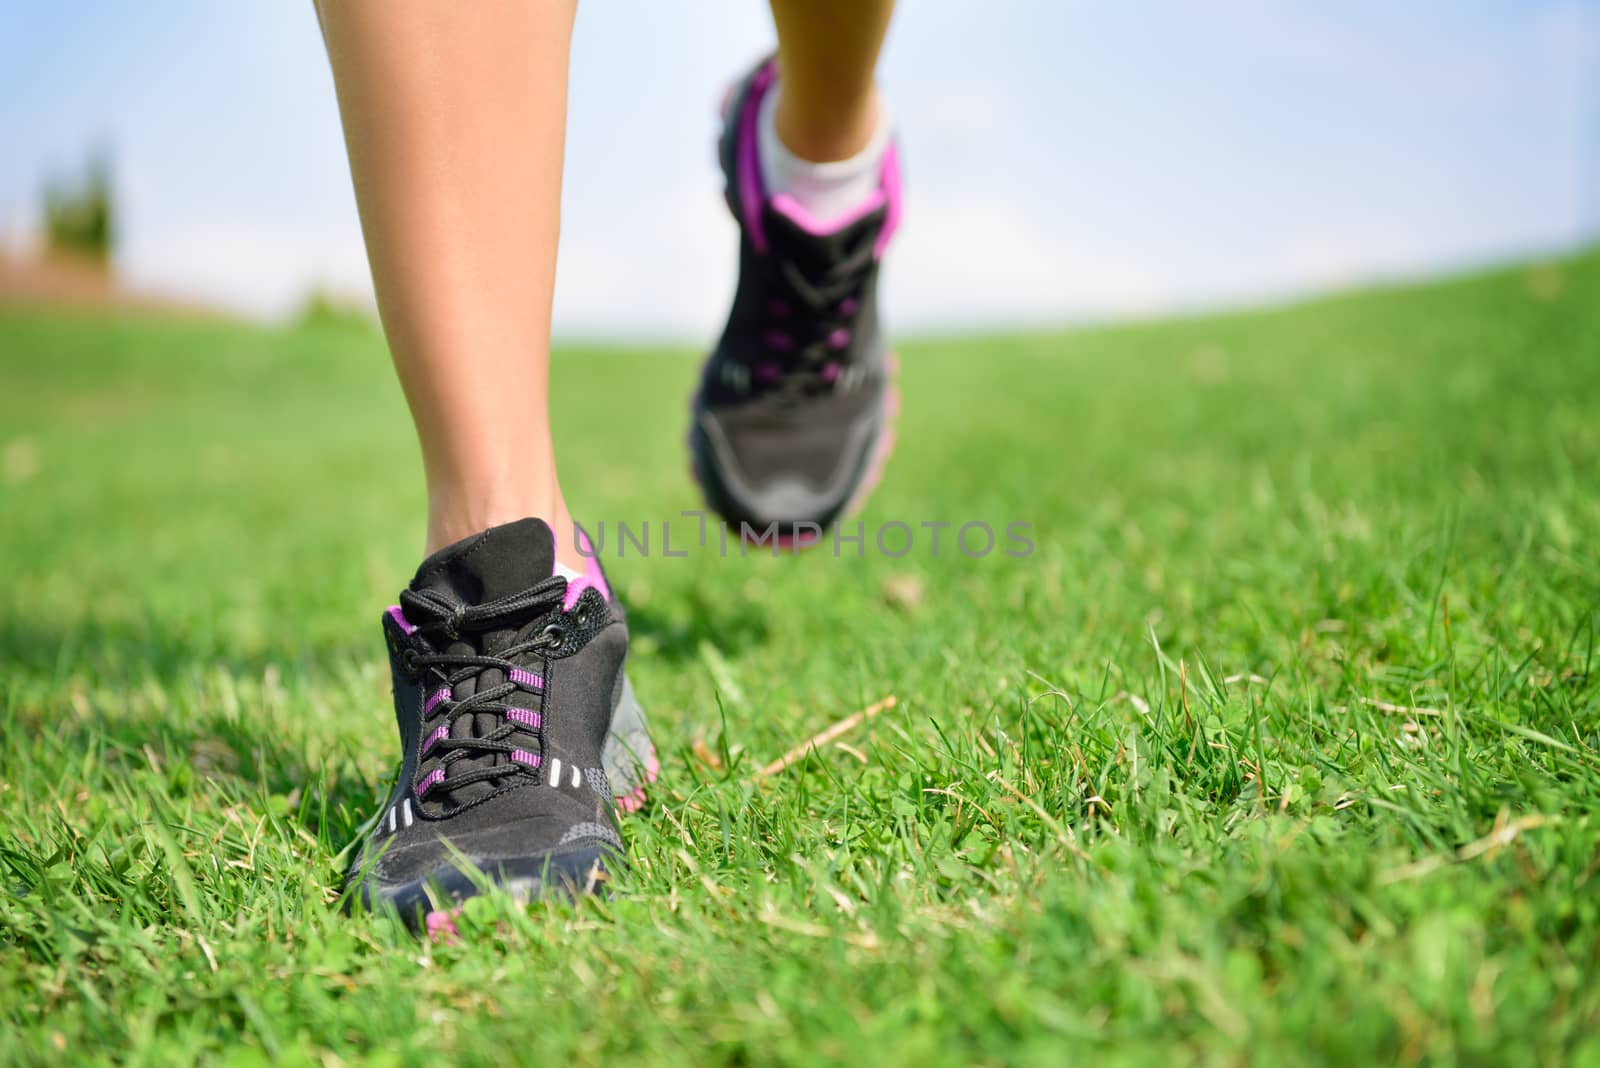 Runner athlete feet running on grass. Fitness woman jog workout and wellness concept. Close up of female running shoes and legs.